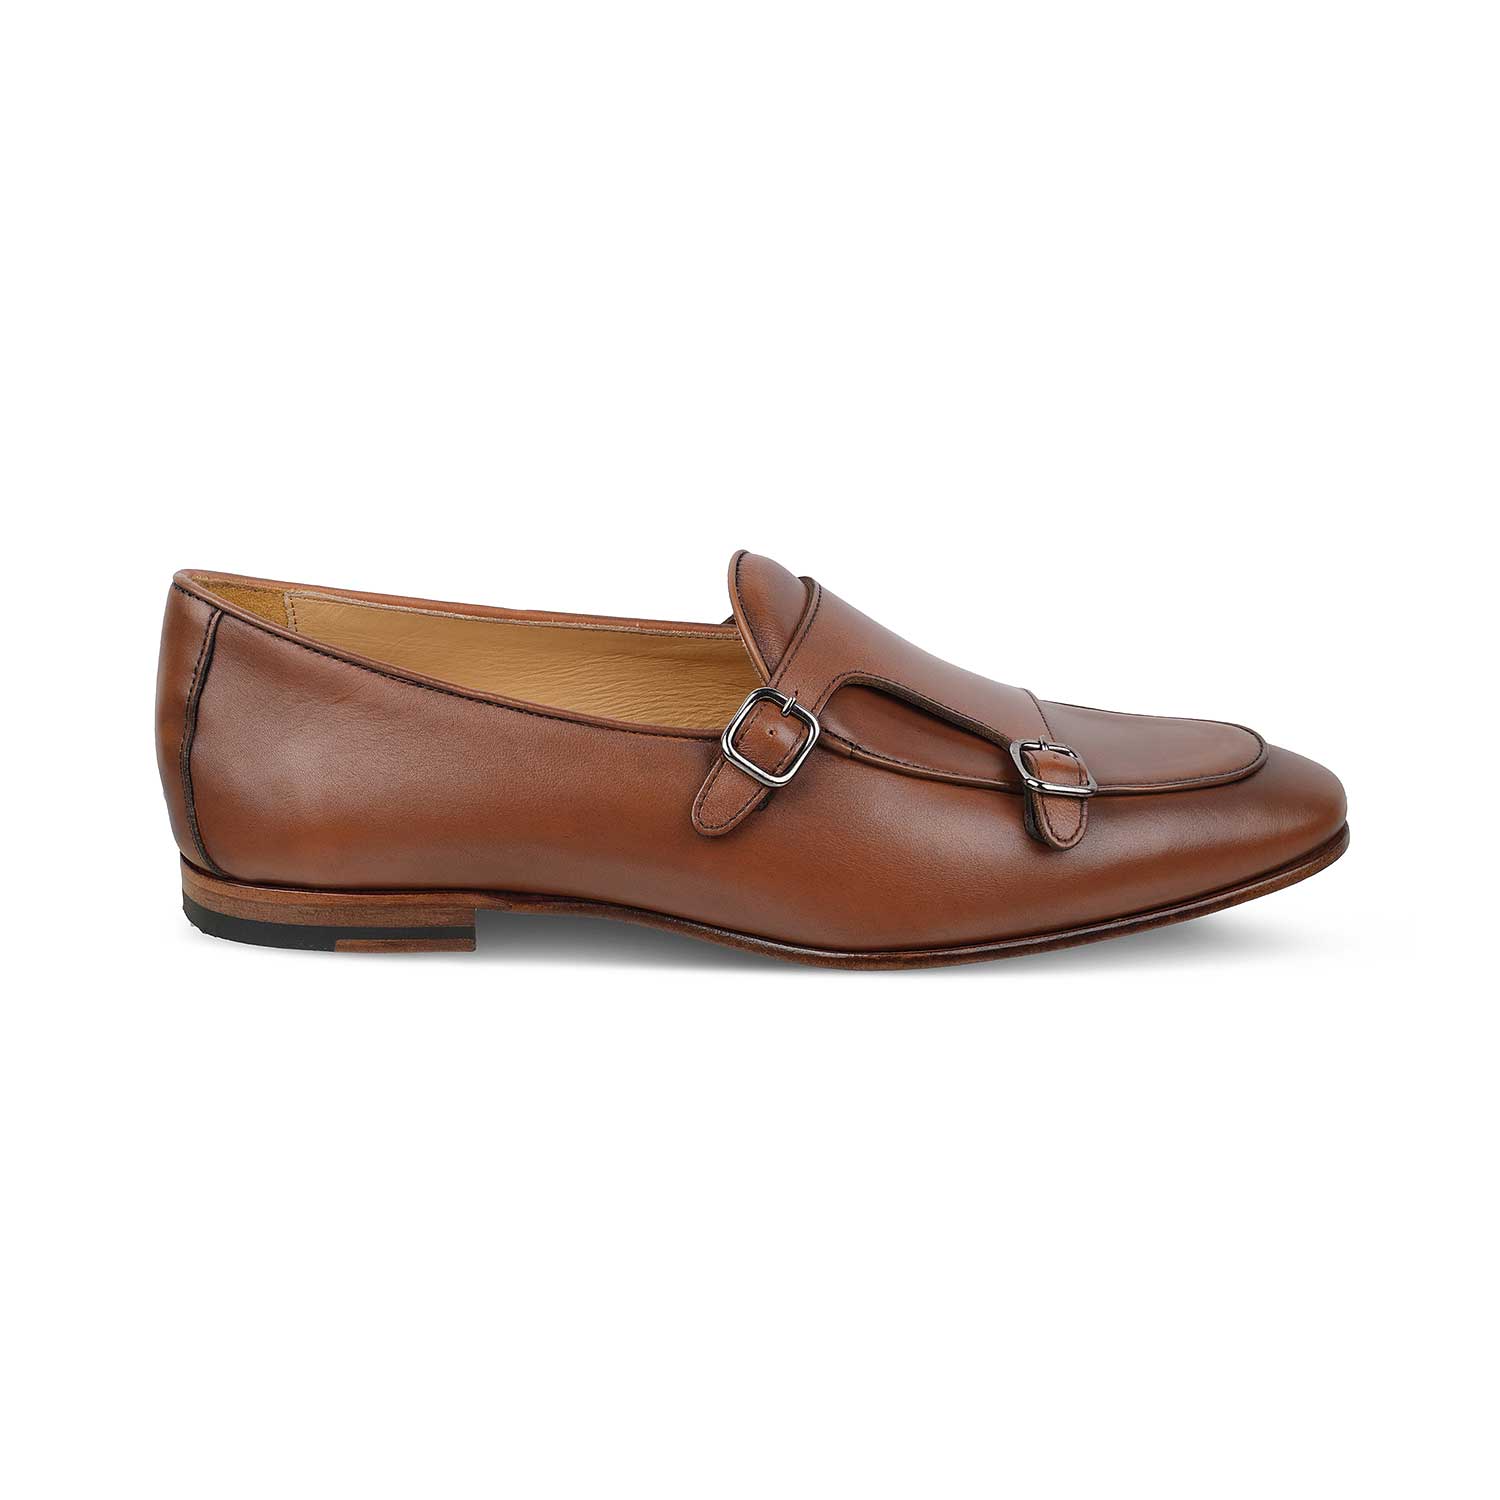 The Maccabeo Brown Men's Handcrafted Double Monk Shoes Tresmode - Tresmode